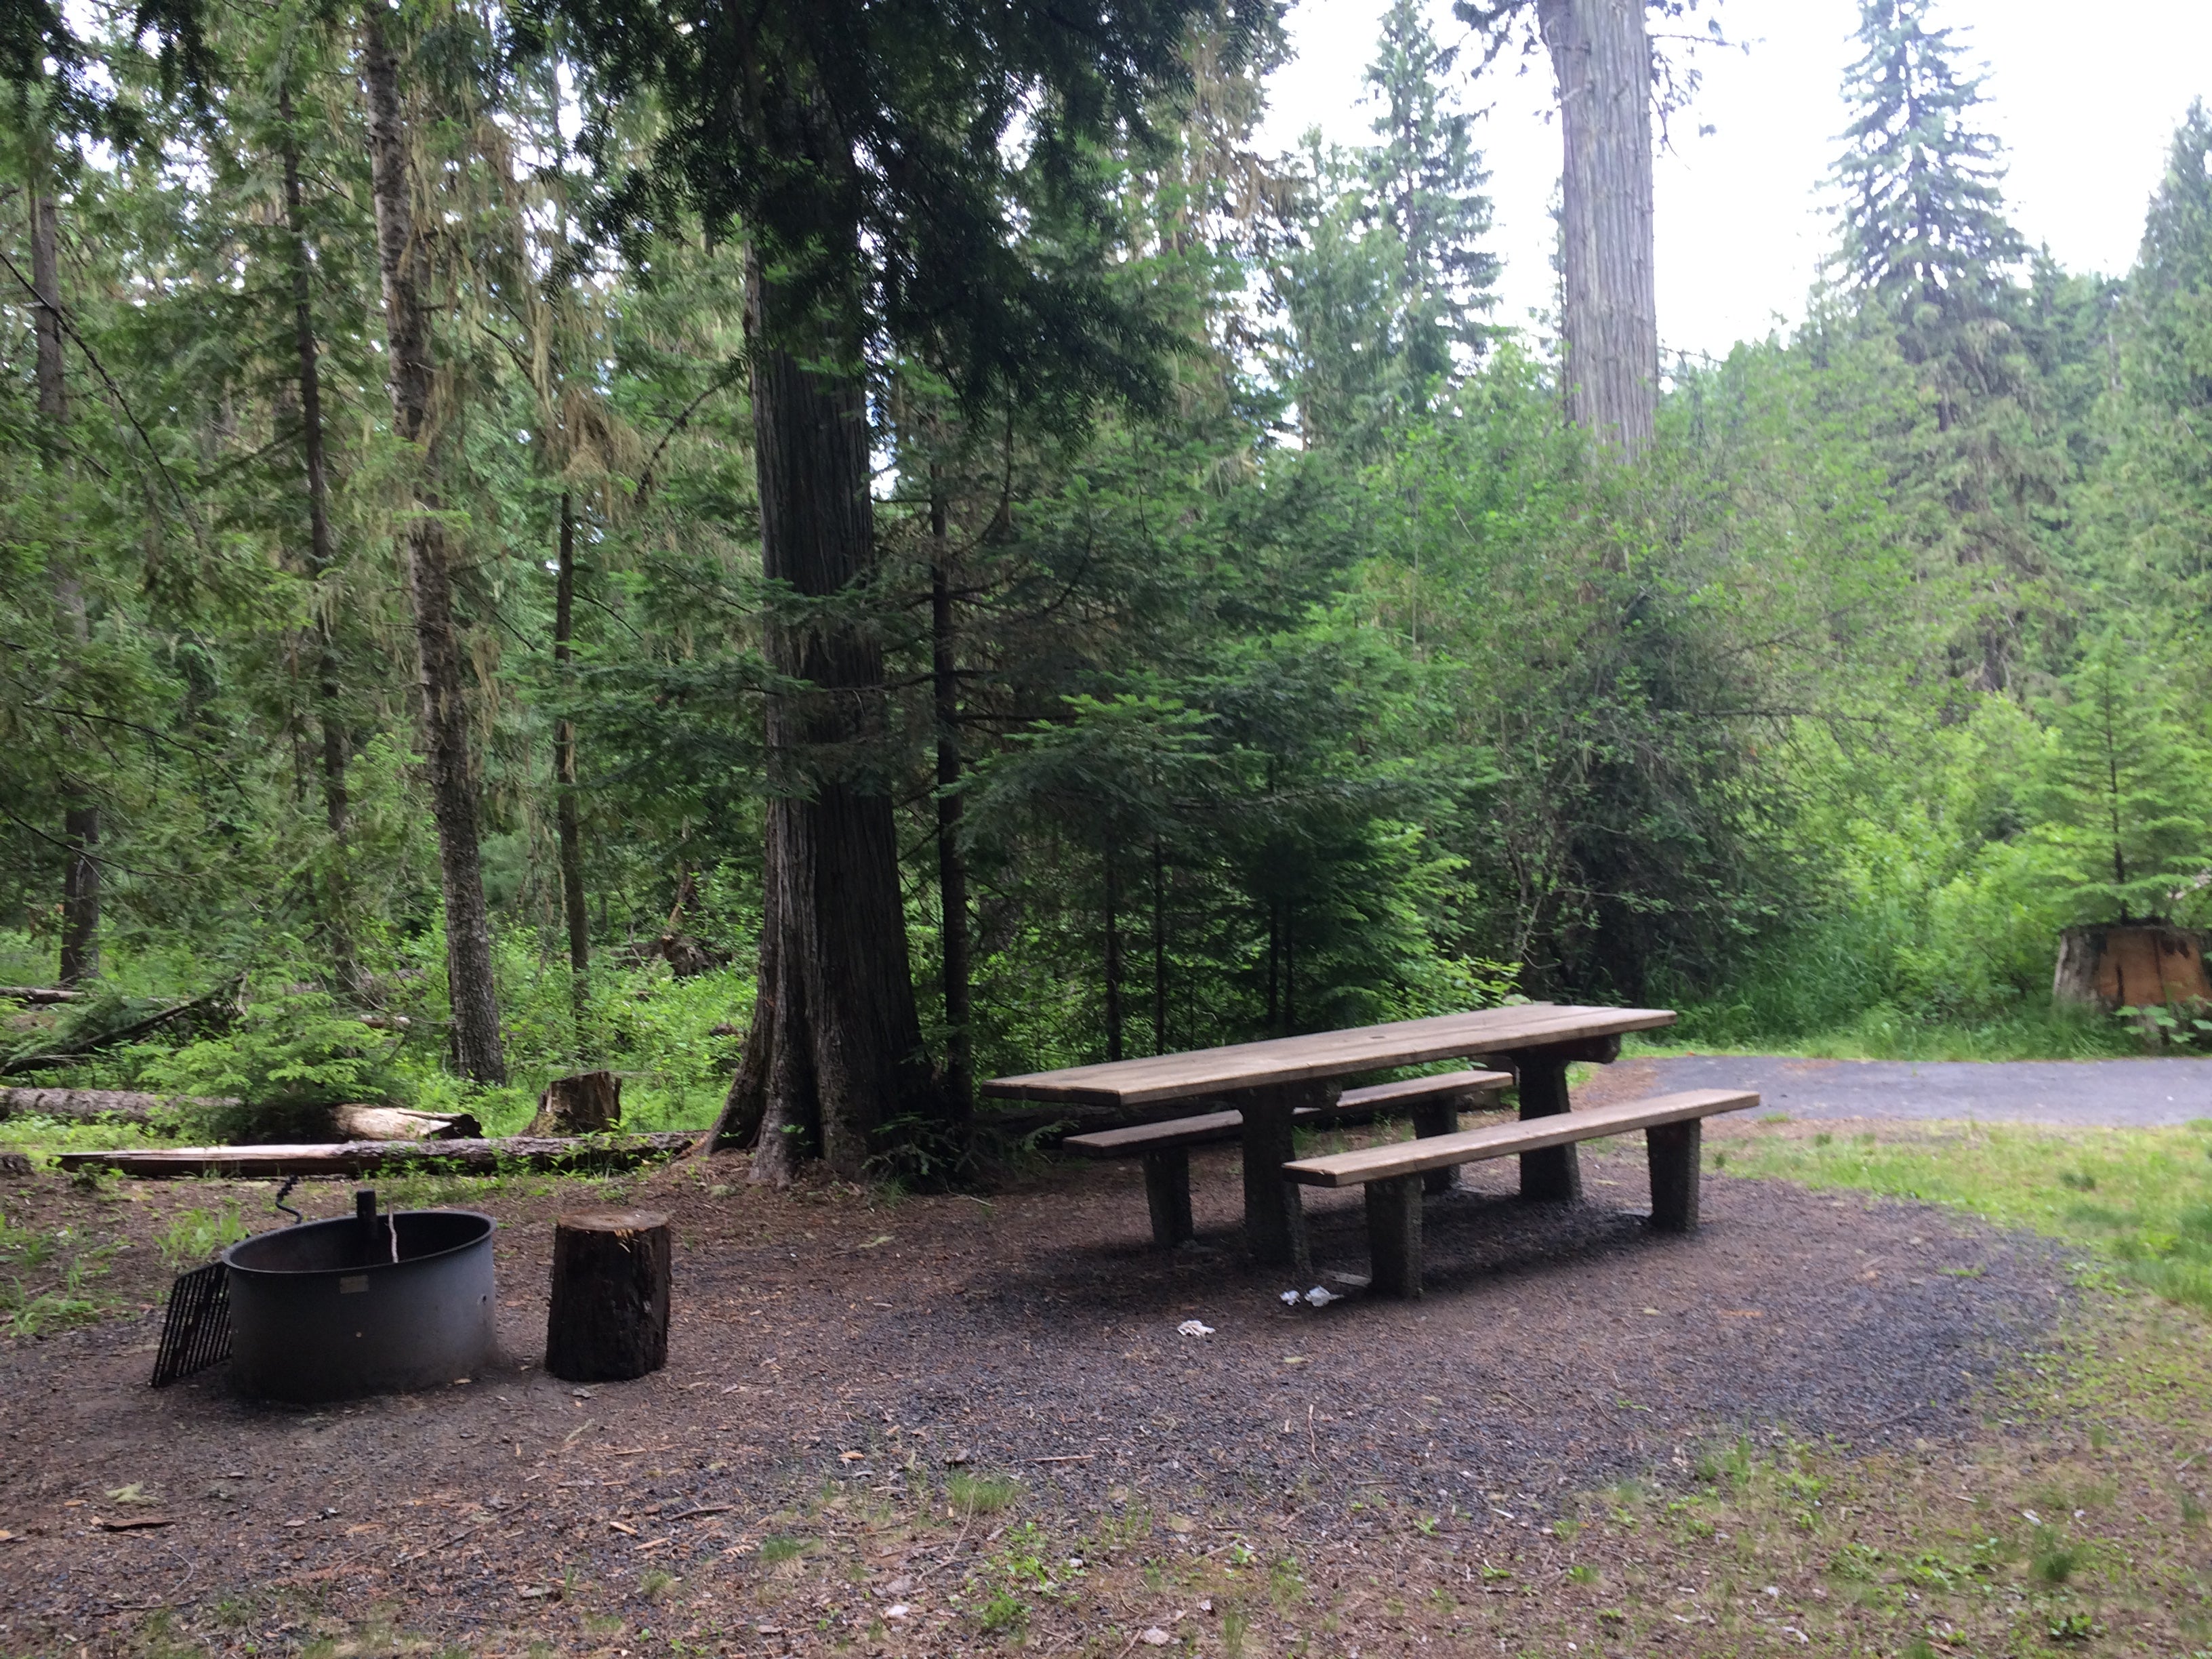 Beautiful and fragrant sites. The campground was very clean; would've been perfect if a little quieter. Maybe the logging traffic is only during the day. If so, it could be highly recommended.